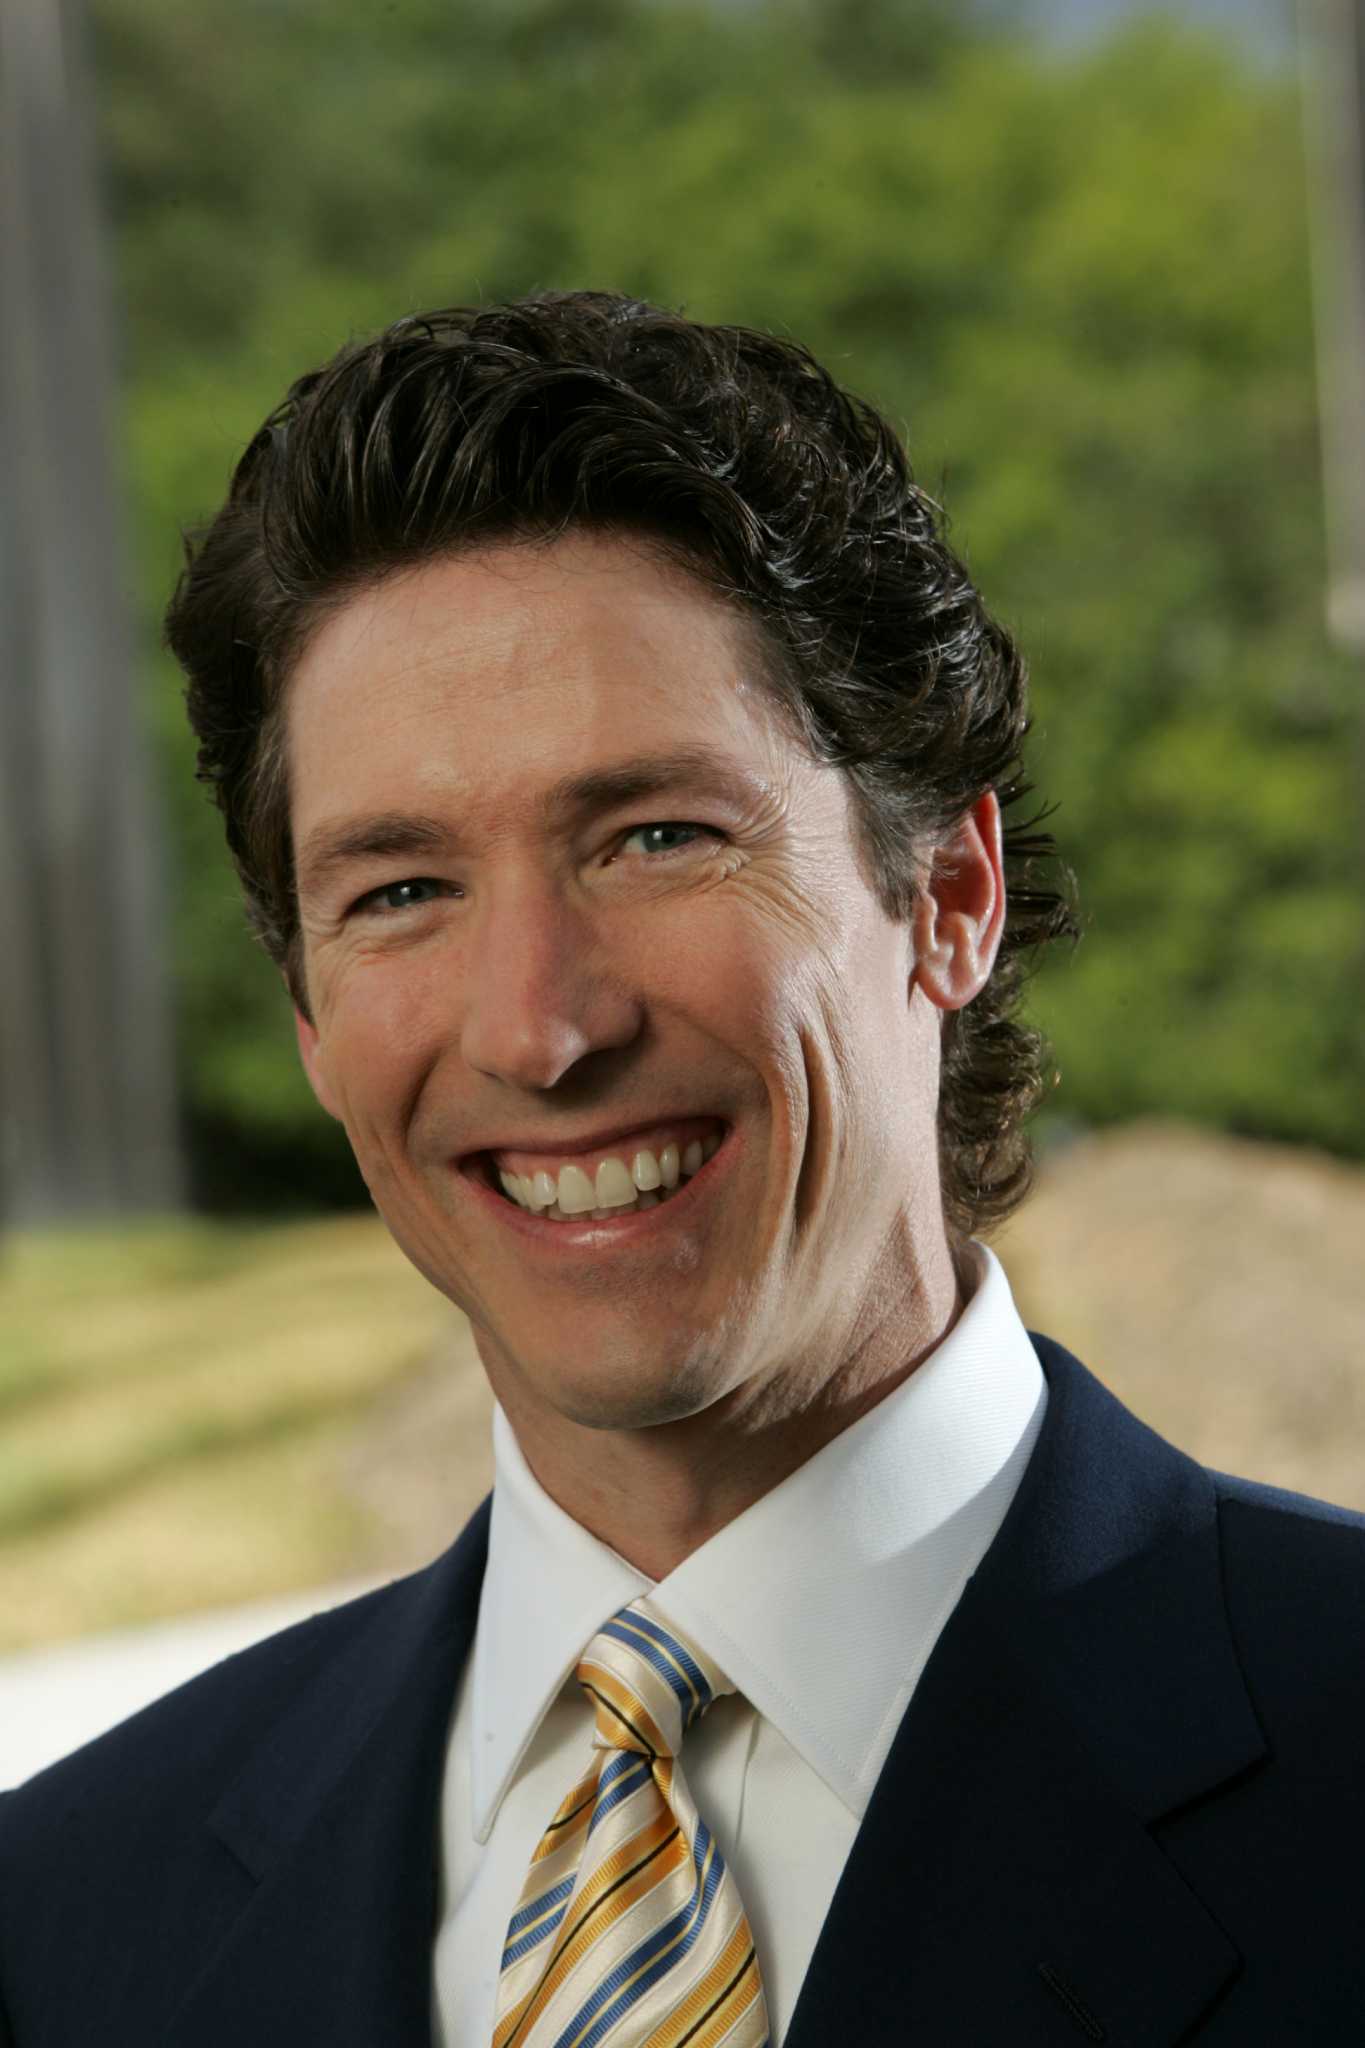 Osteen Church Media silent as democratic protesters at republican
national convention